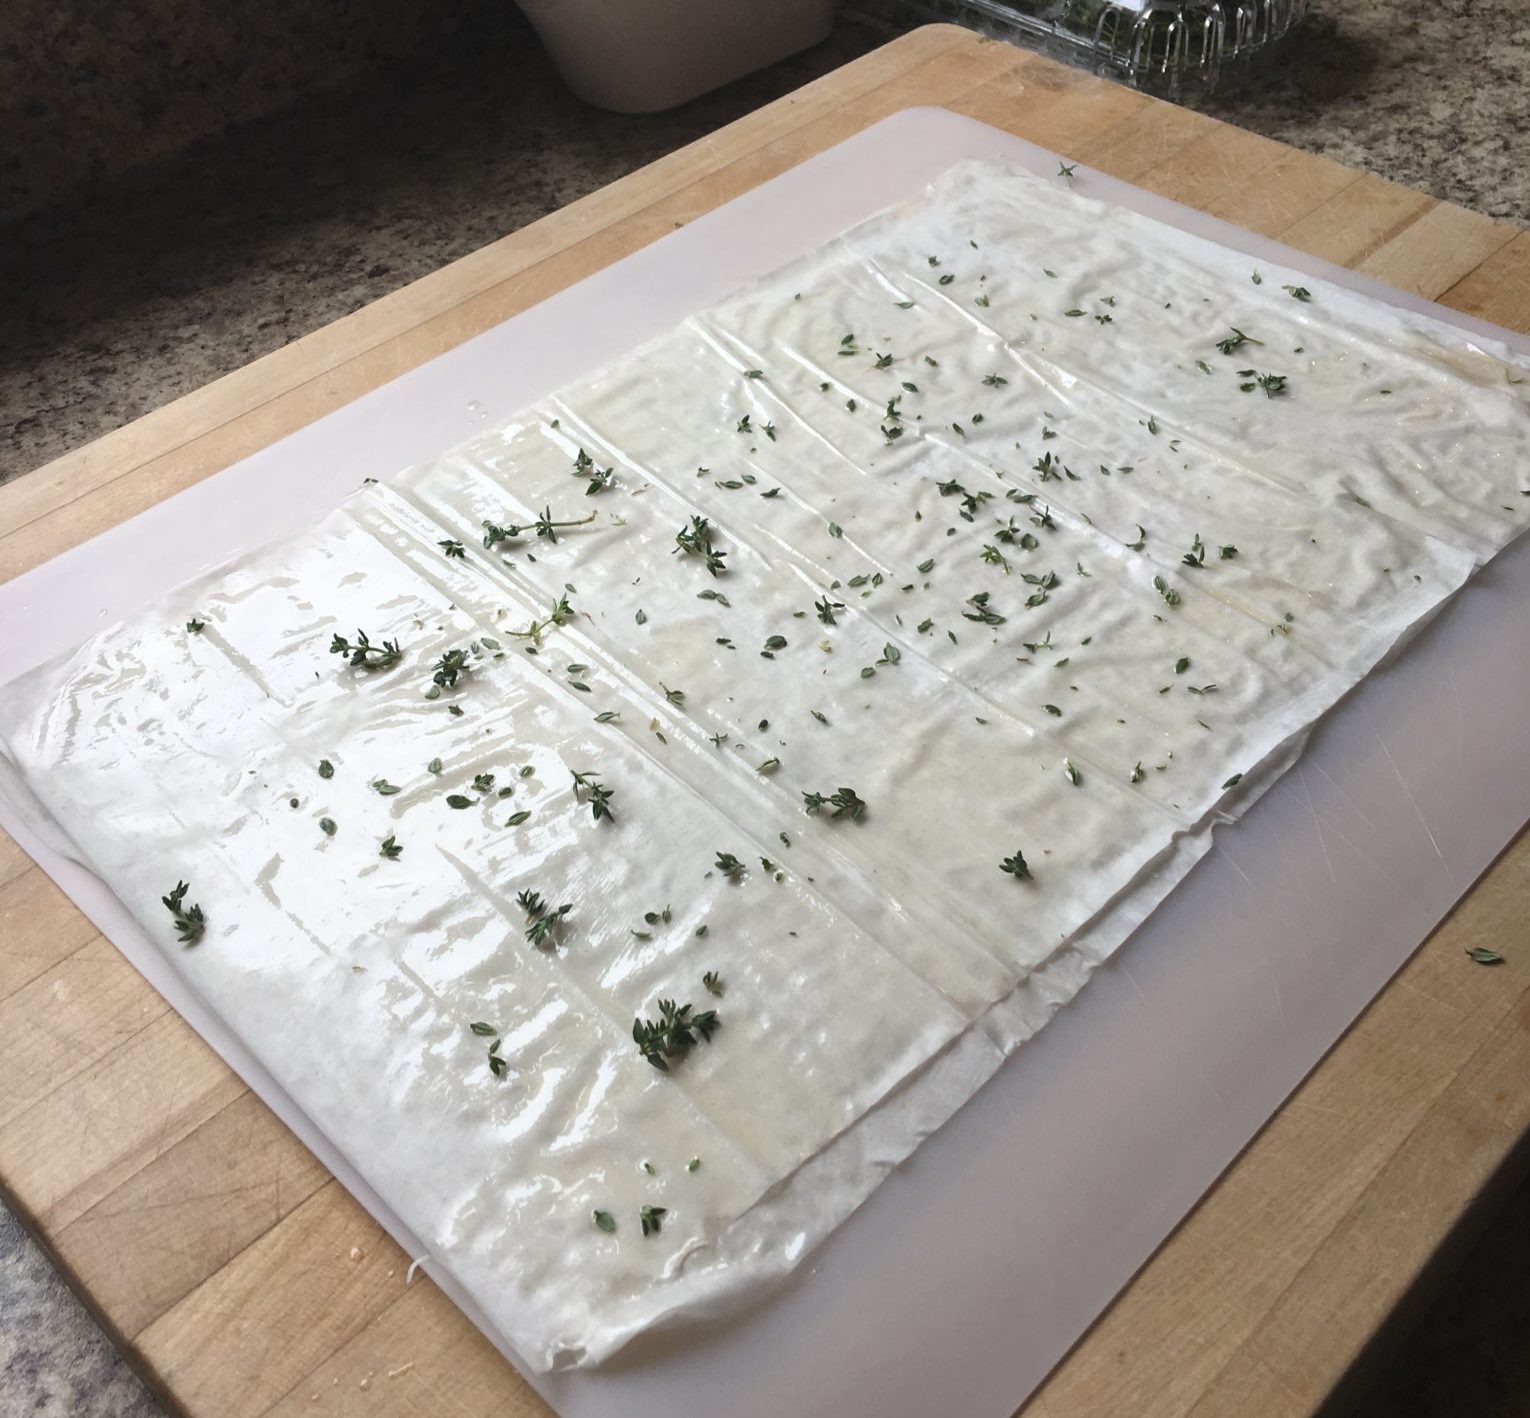 Filo dough with thyme leaves